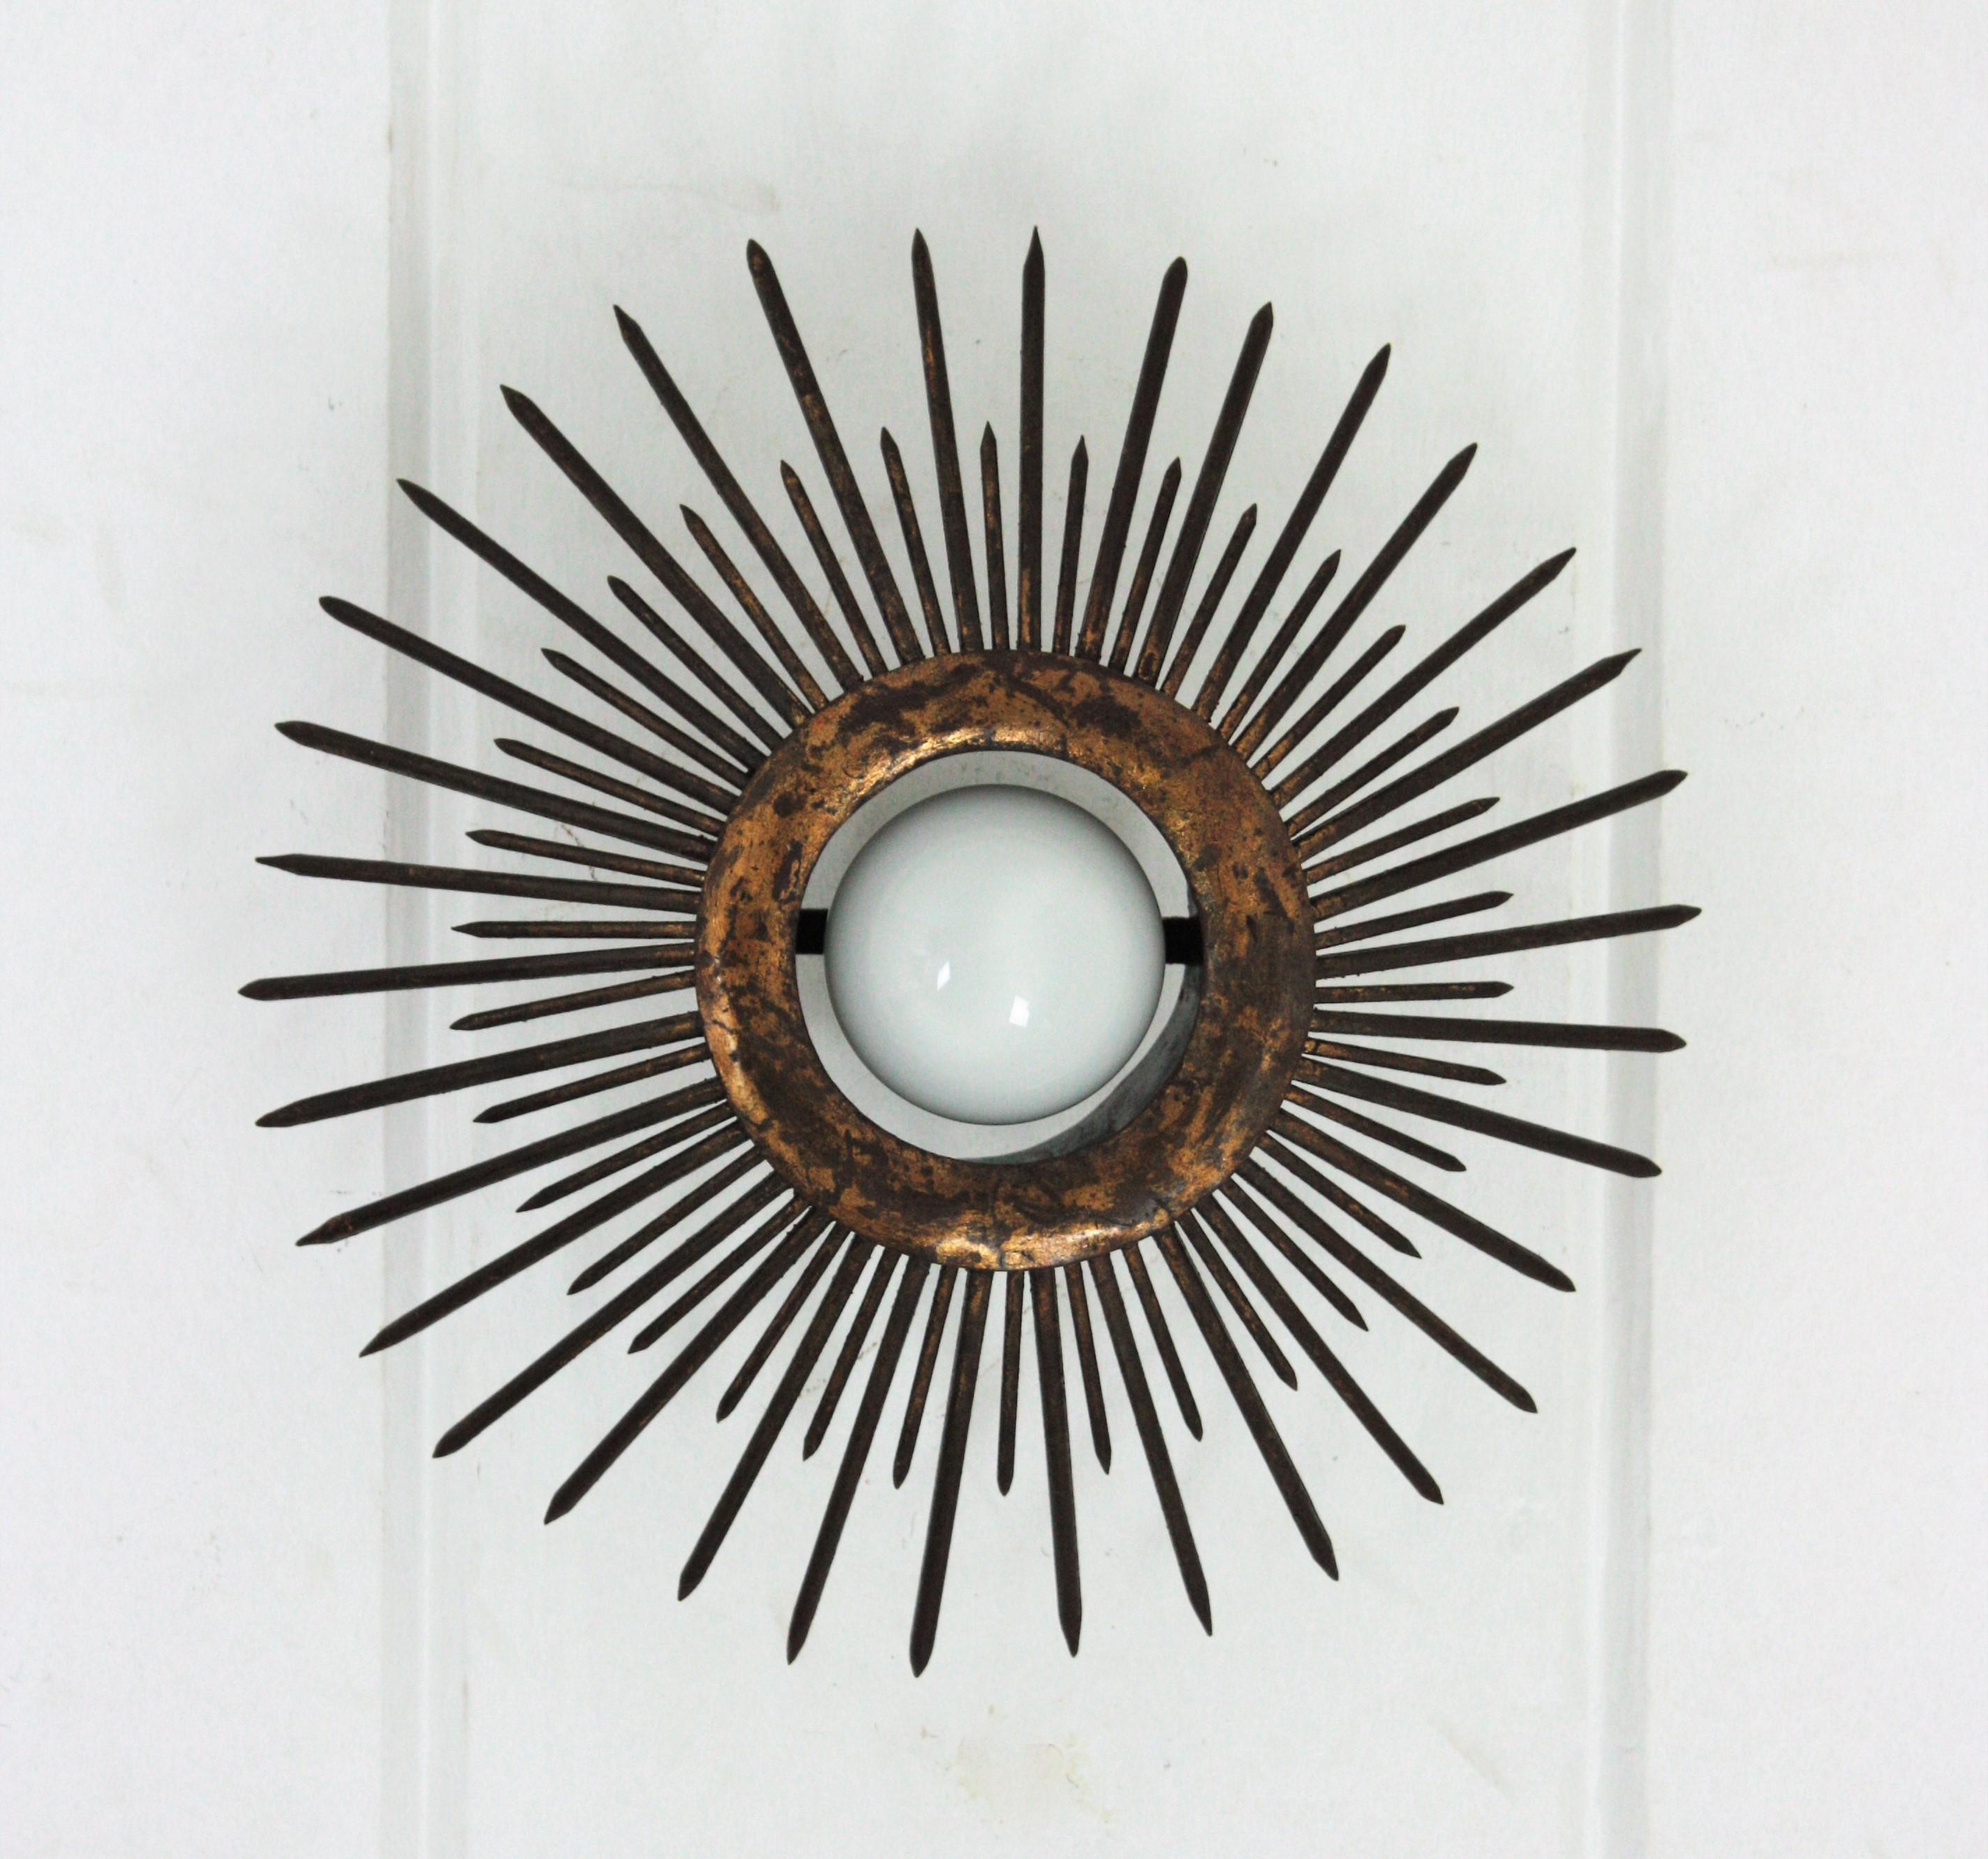 French Pair of Gilt Iron Sunburst Brutalist Light Fixtures with Design of Nails For Sale